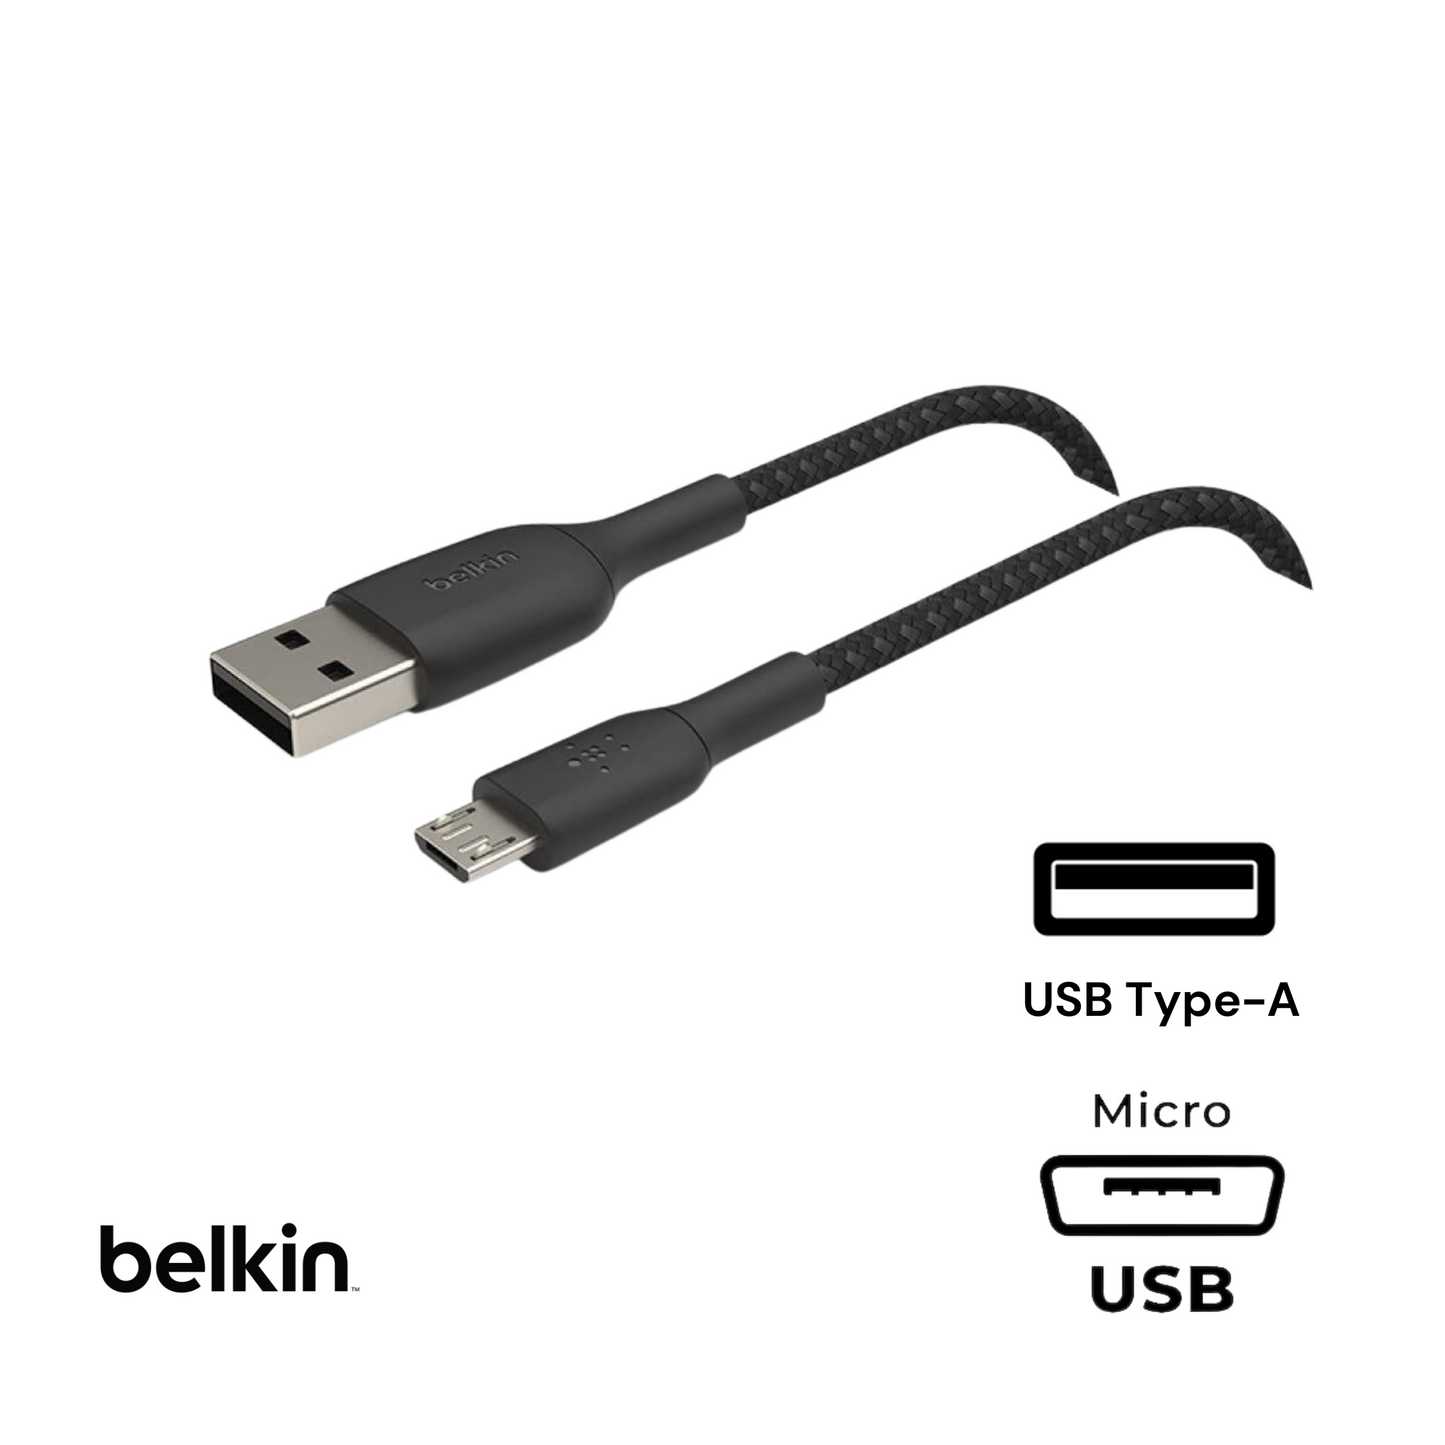 Belkin Boost Charge USB-A to Micro-USB Cable